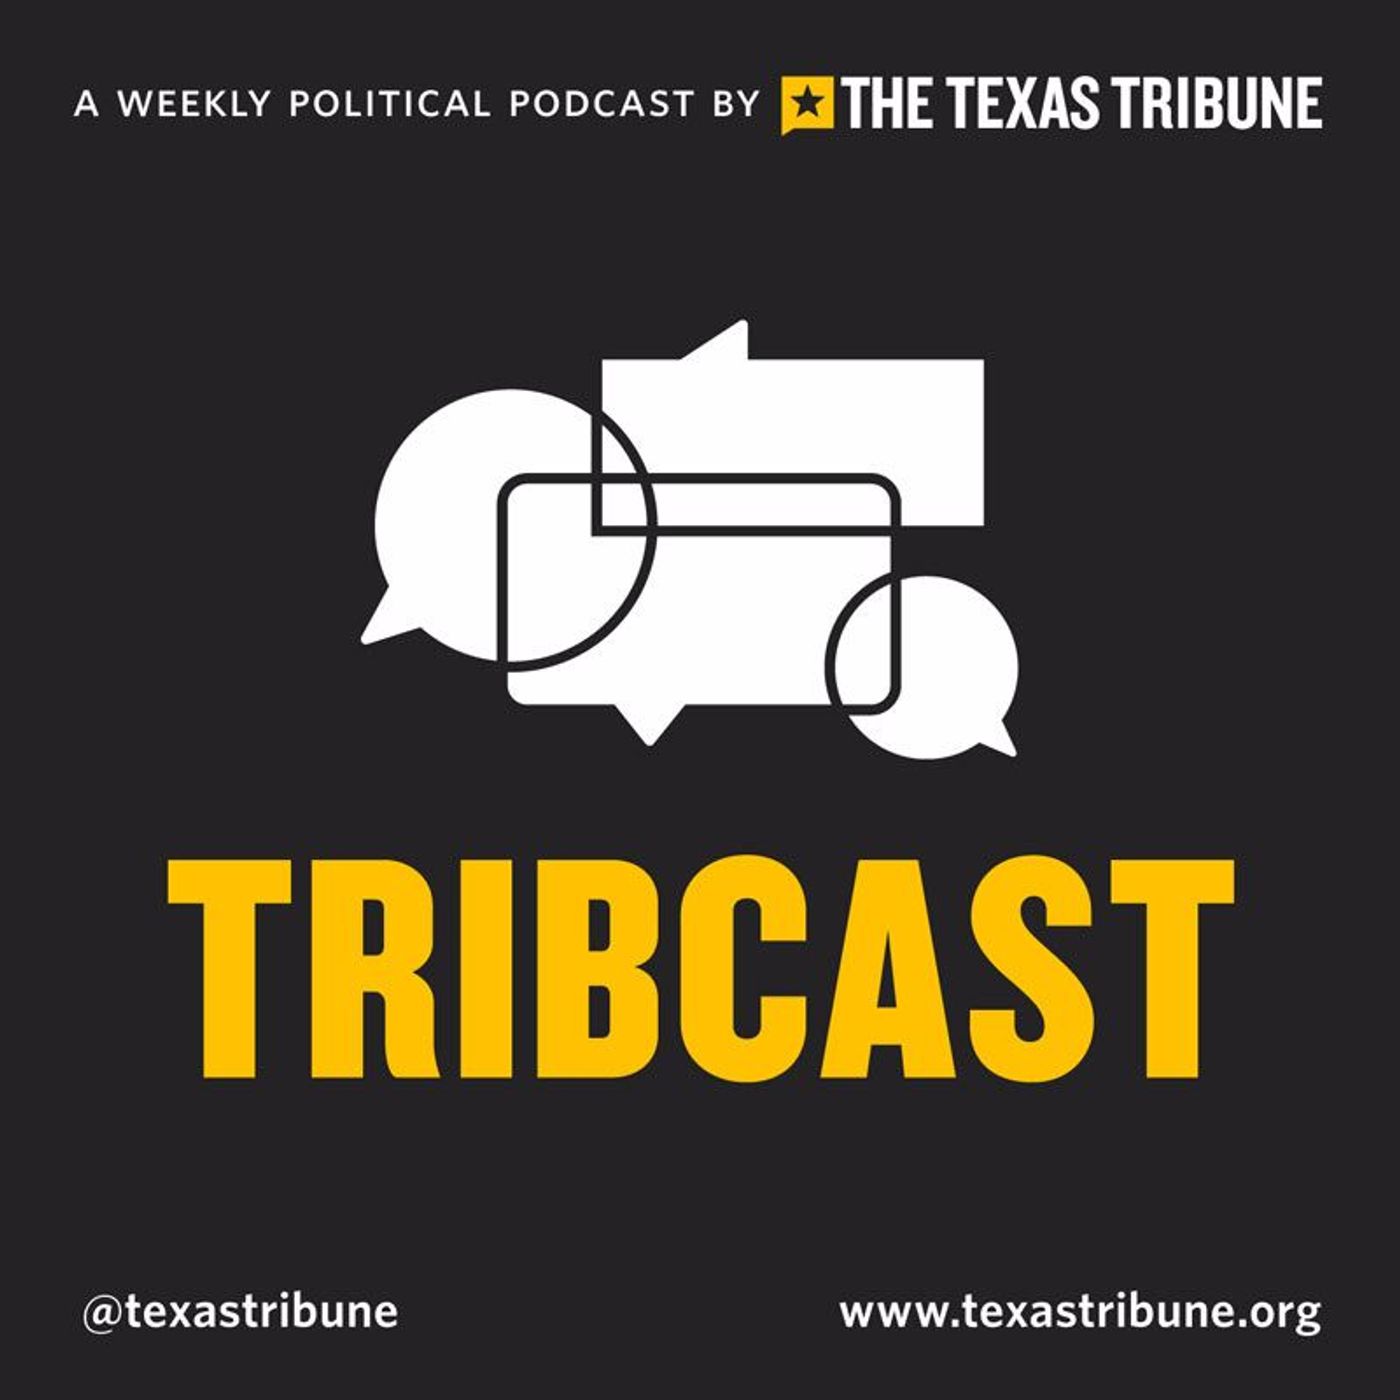 TribCast: Iowa, New Hampshire, Immigration and Ken Paxton